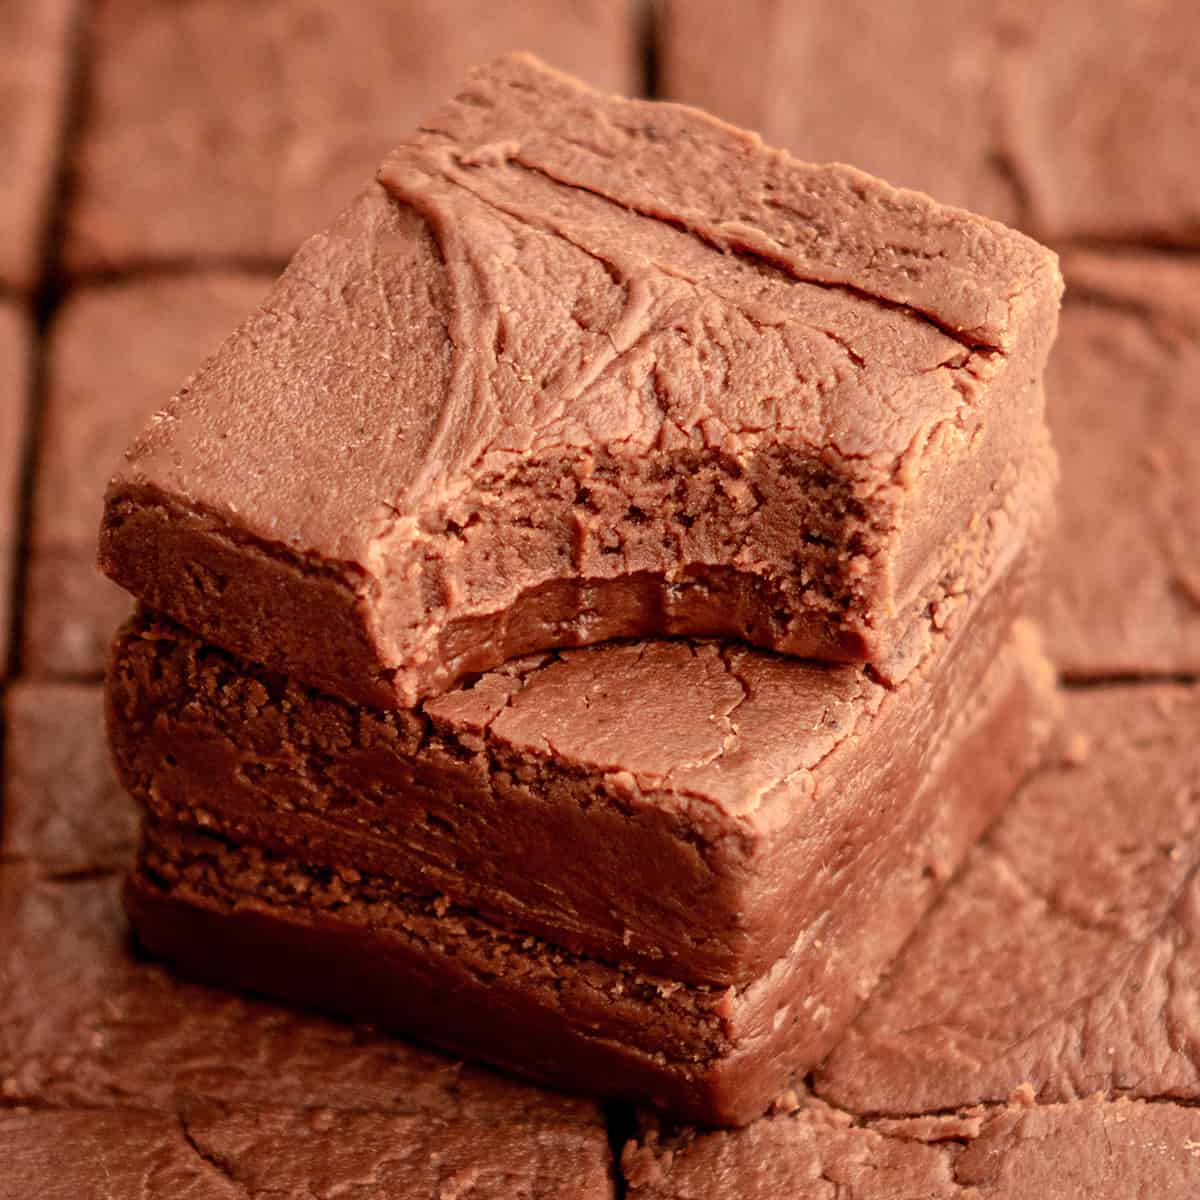 a stack of 3 pieces of Chocolate Fudge, one with a bite taken out of it